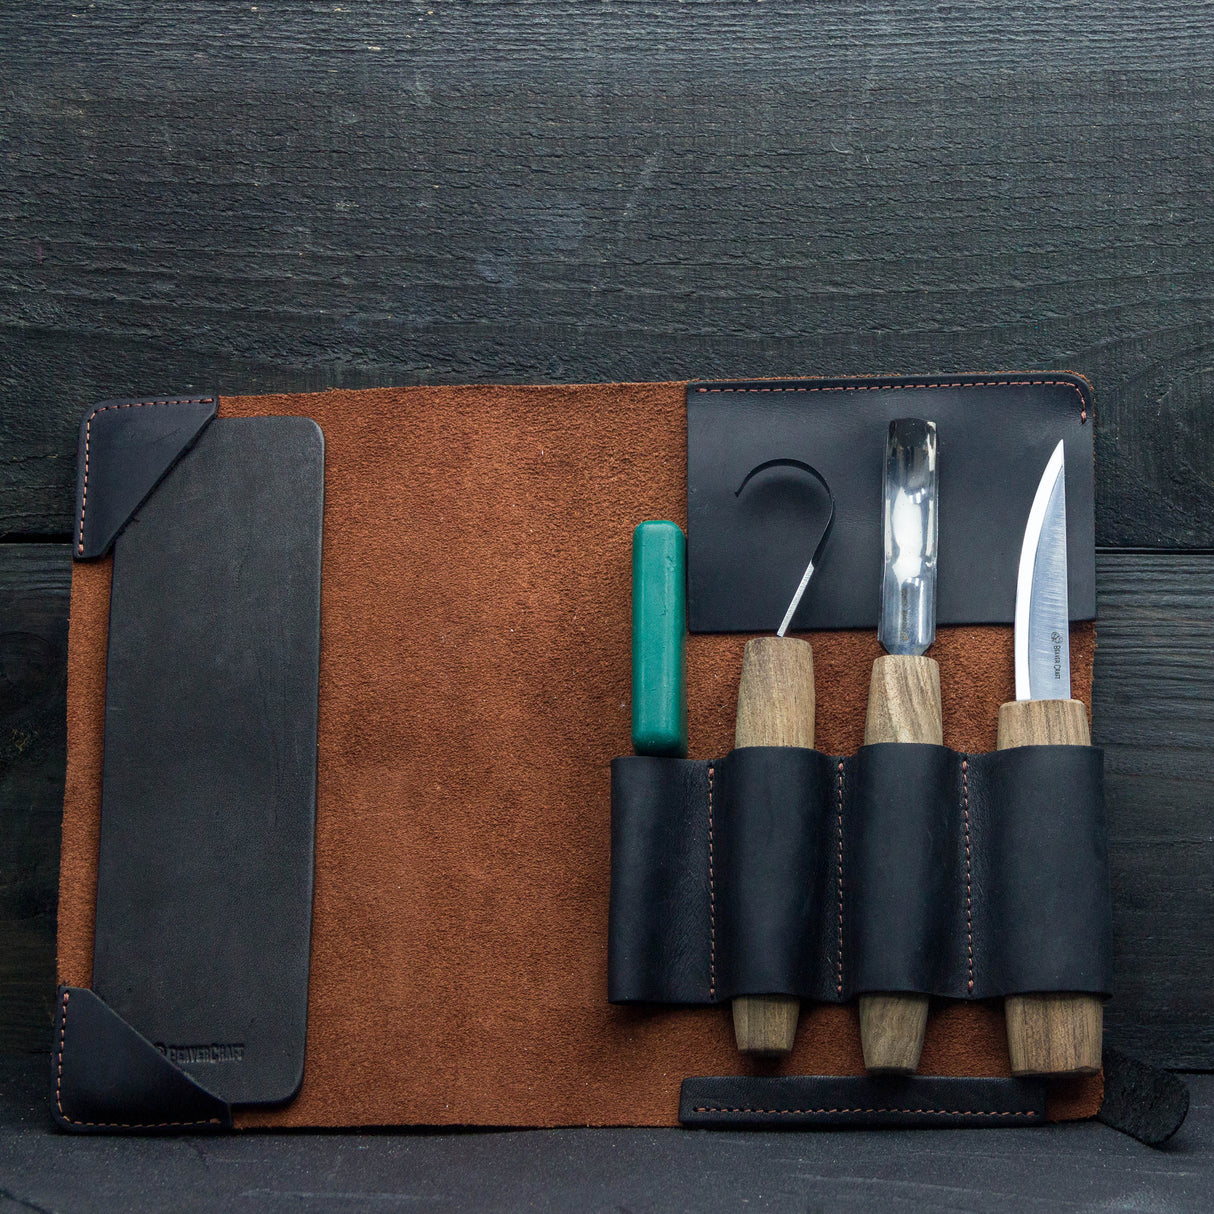 5 Piece Extended Carving Set in Genuine Leather Tool Roll